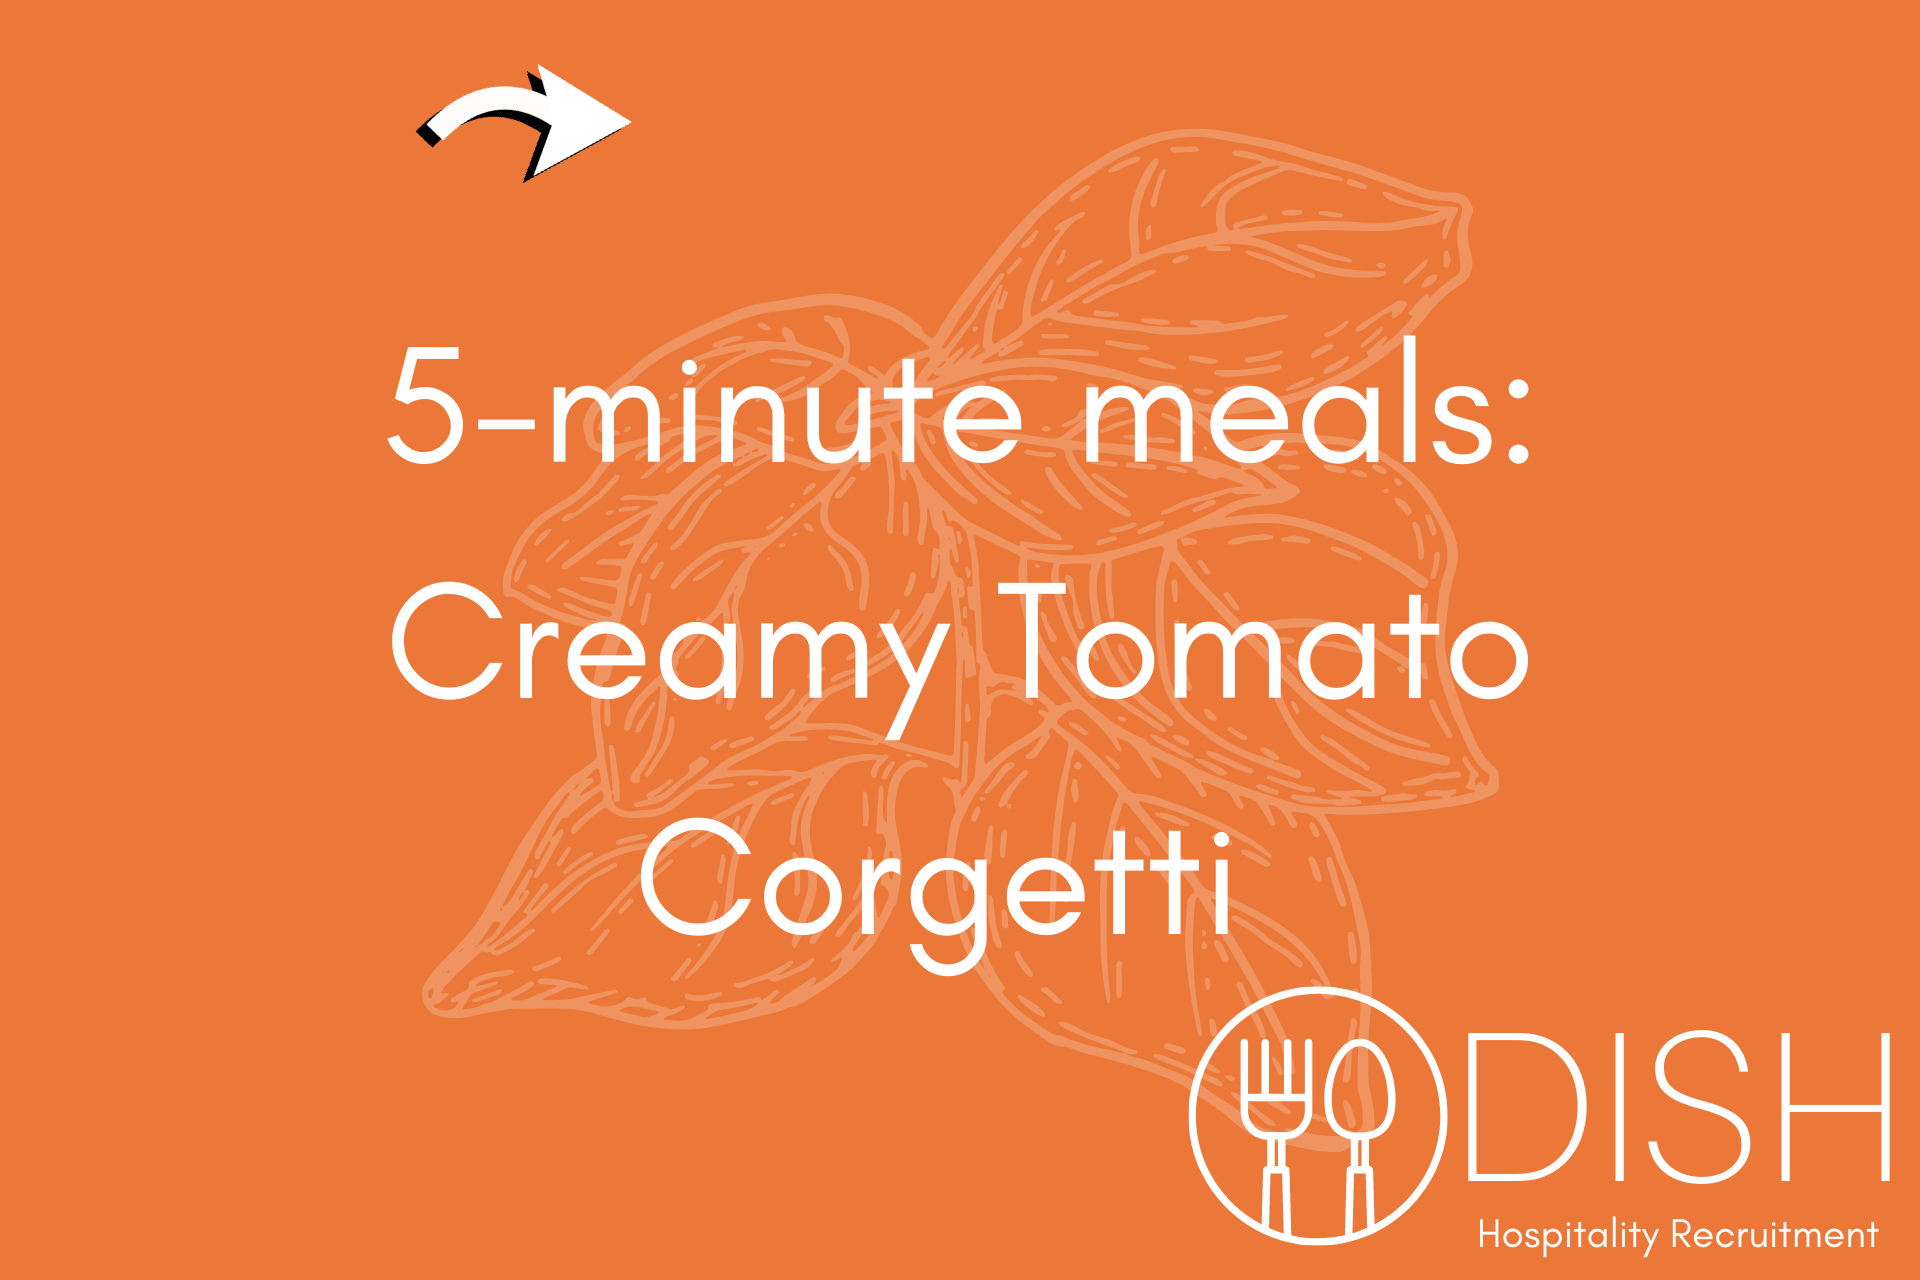 5 Minute Meal of the Week: Creamy Tomato Corgetti